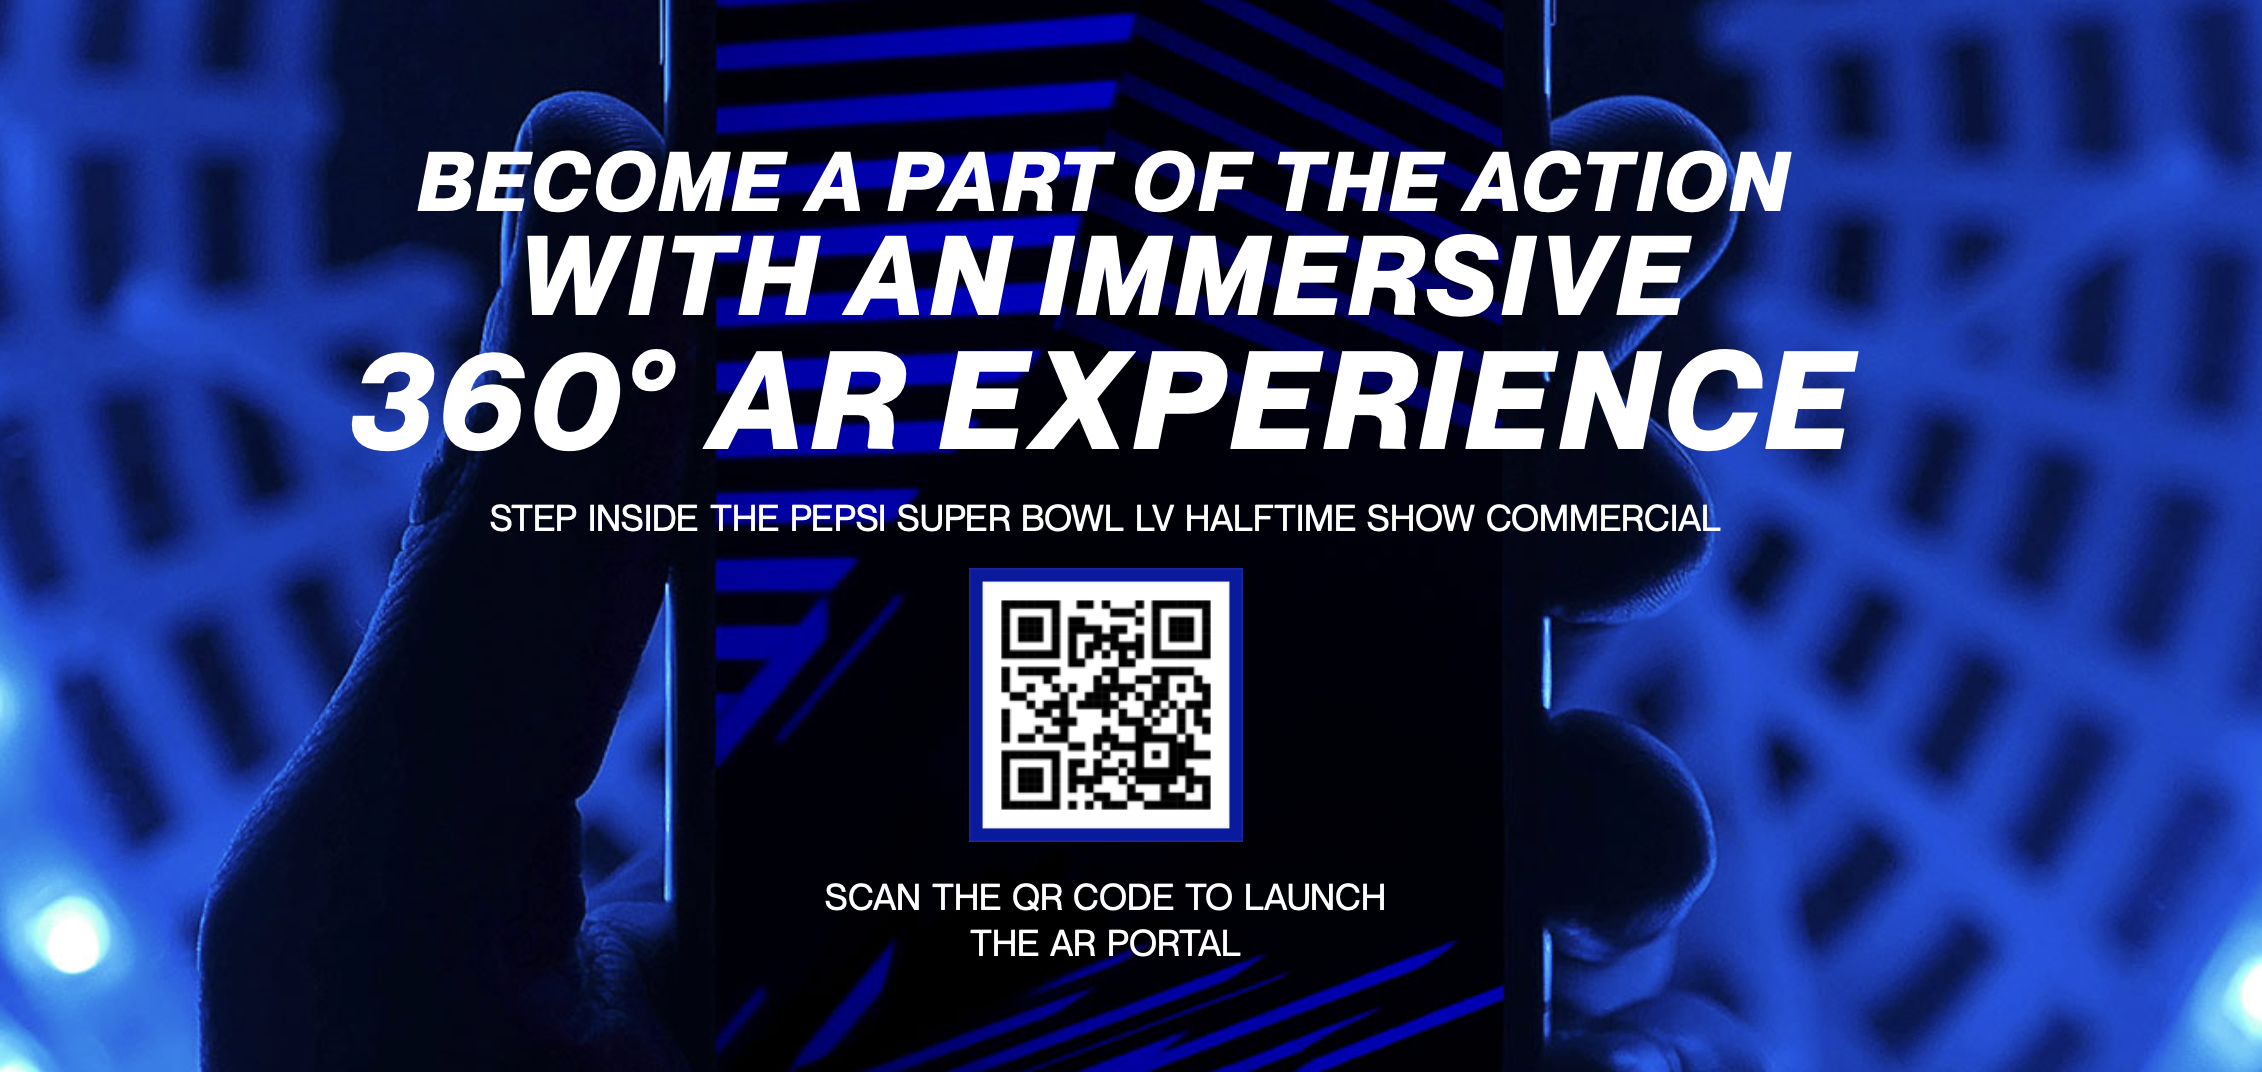 How to watch Super Bowl LV free halftime show – 360-degree AR experience